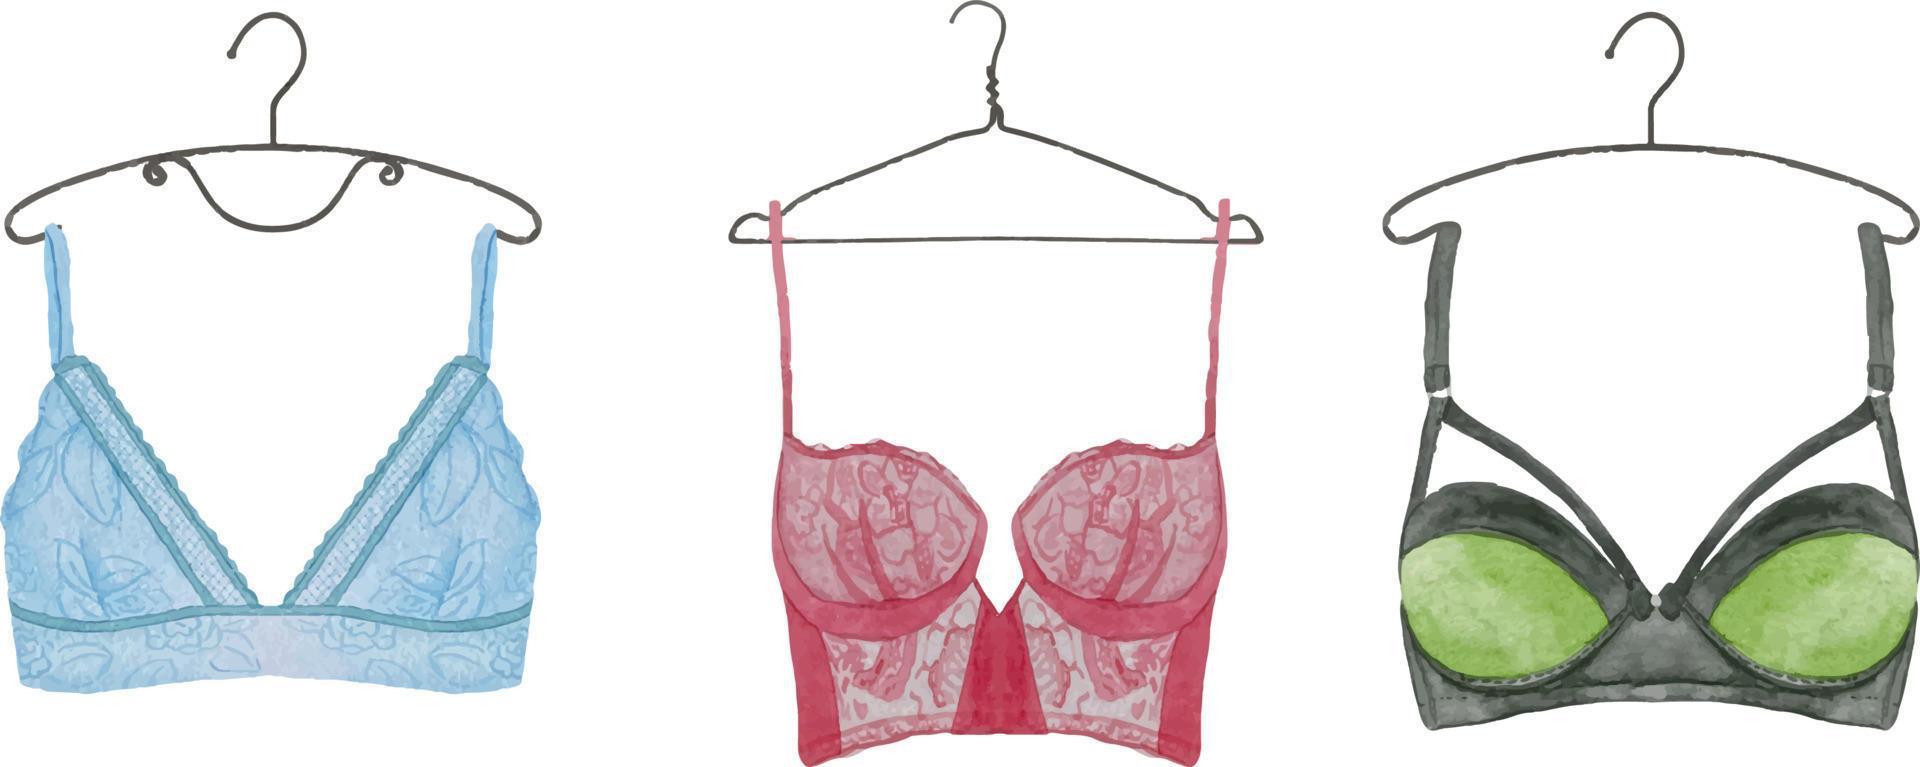 Watercolor colorful lace bra on white background, isolated watercolor illustration. vector